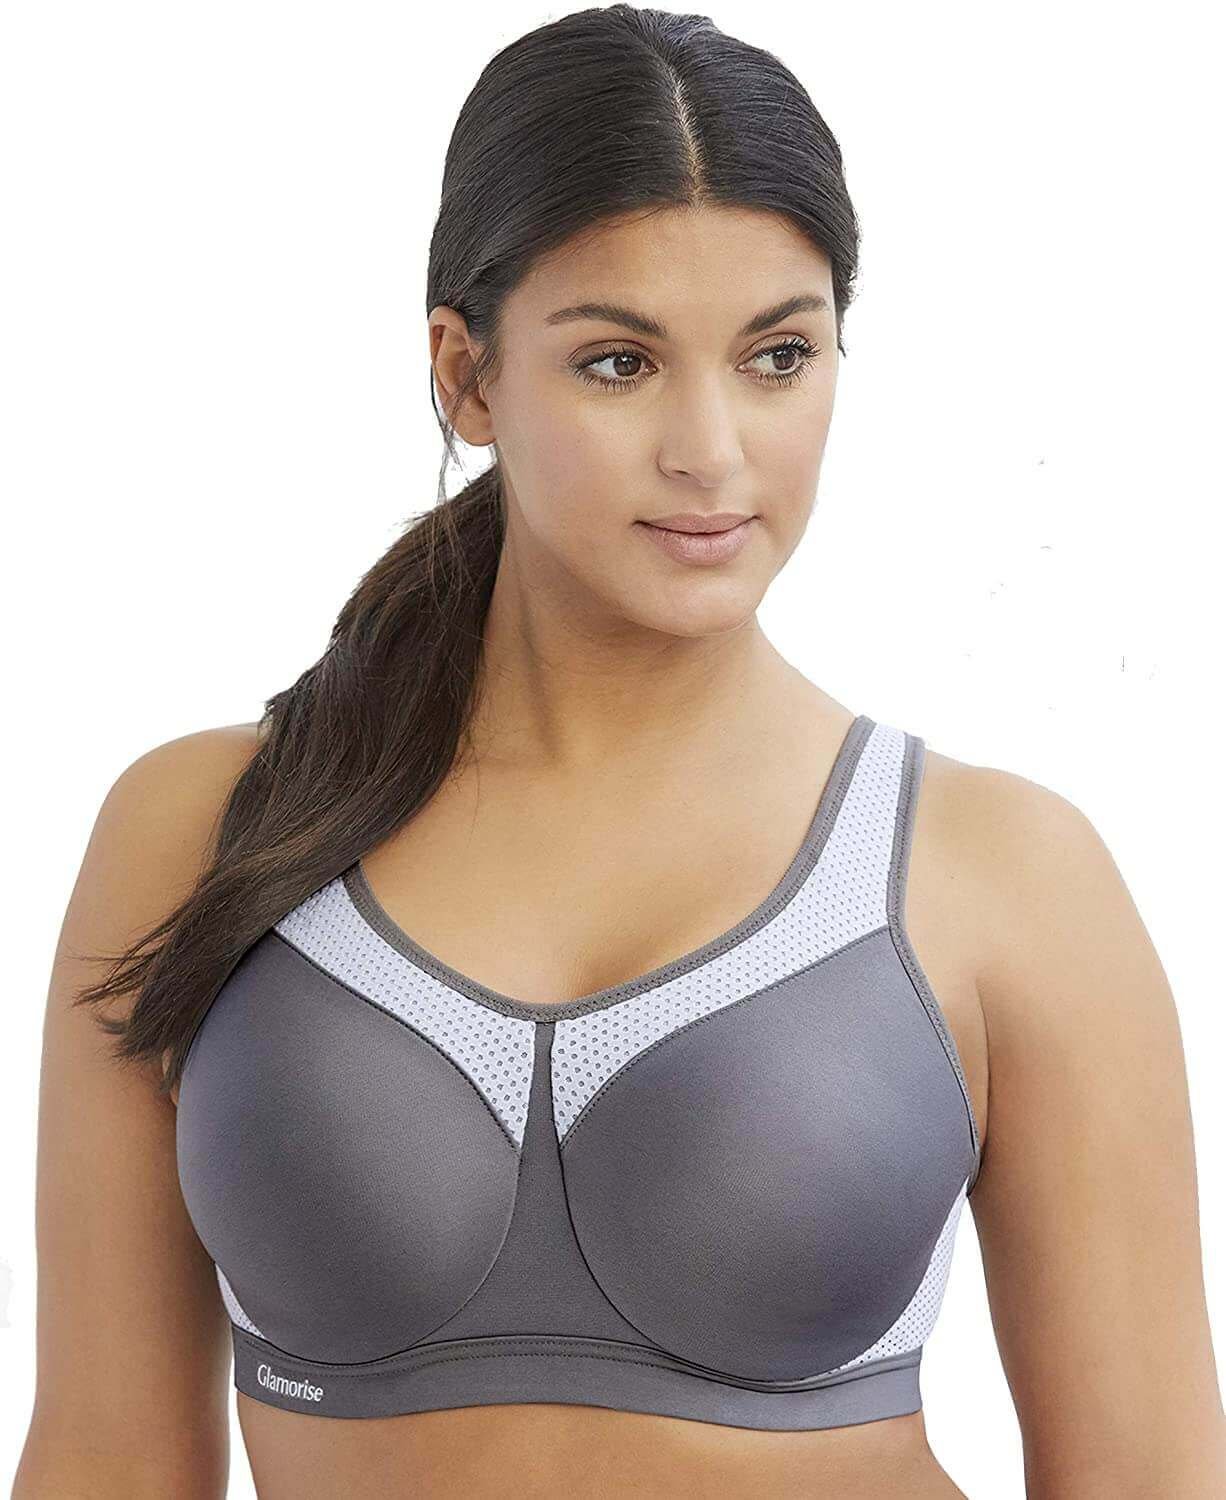 Best Sport Bras For Support Good Sports Bras Are Really Hard For Me To